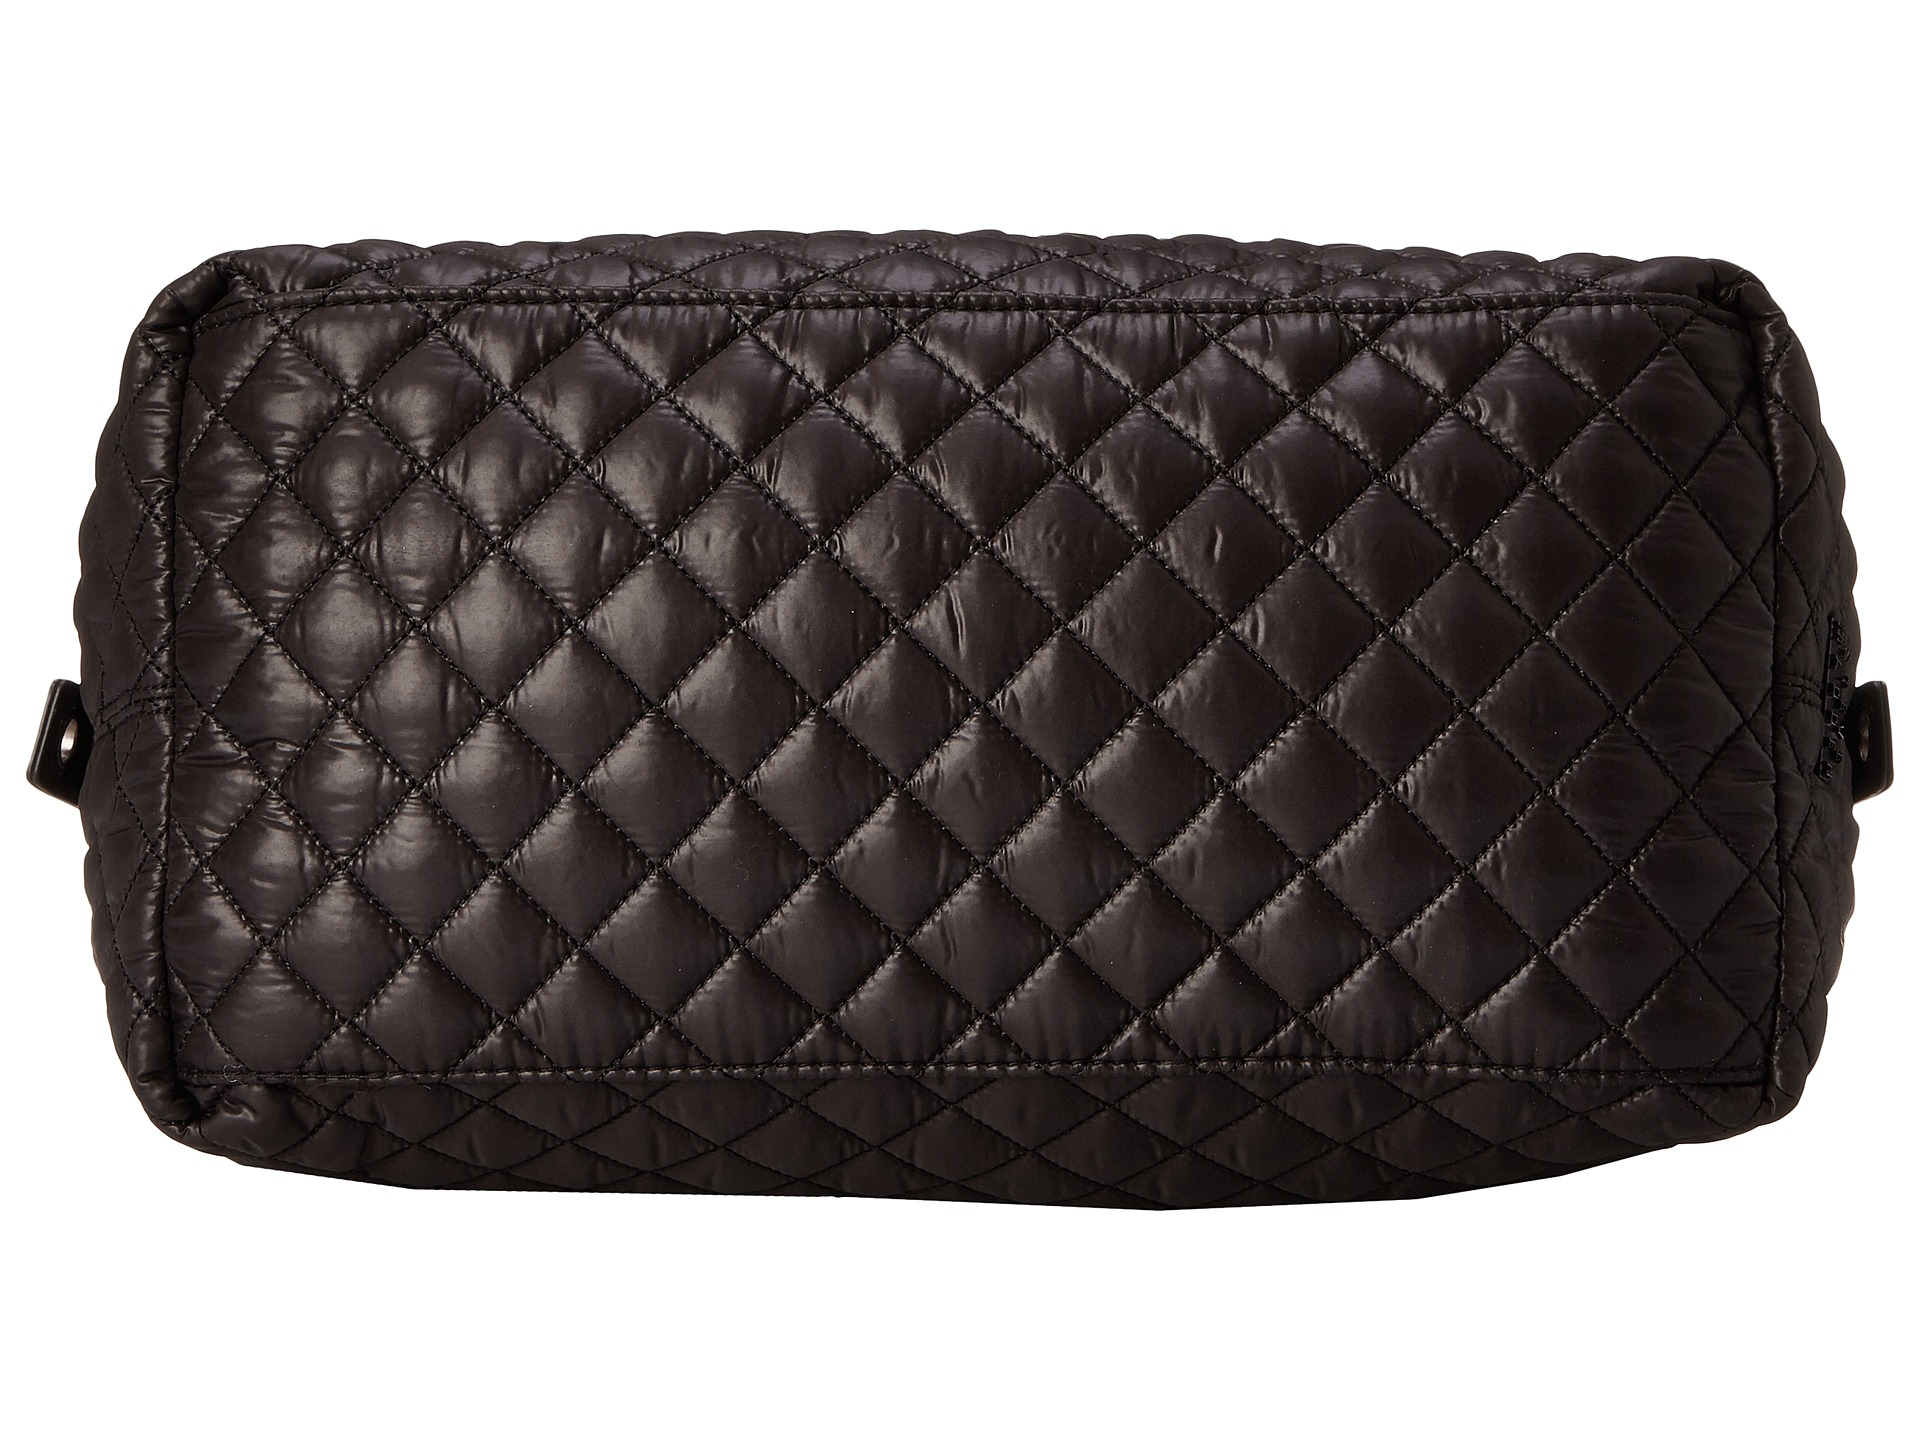 Steve Madden Bvoyagee Quilted Large Satchel in Black - Lyst